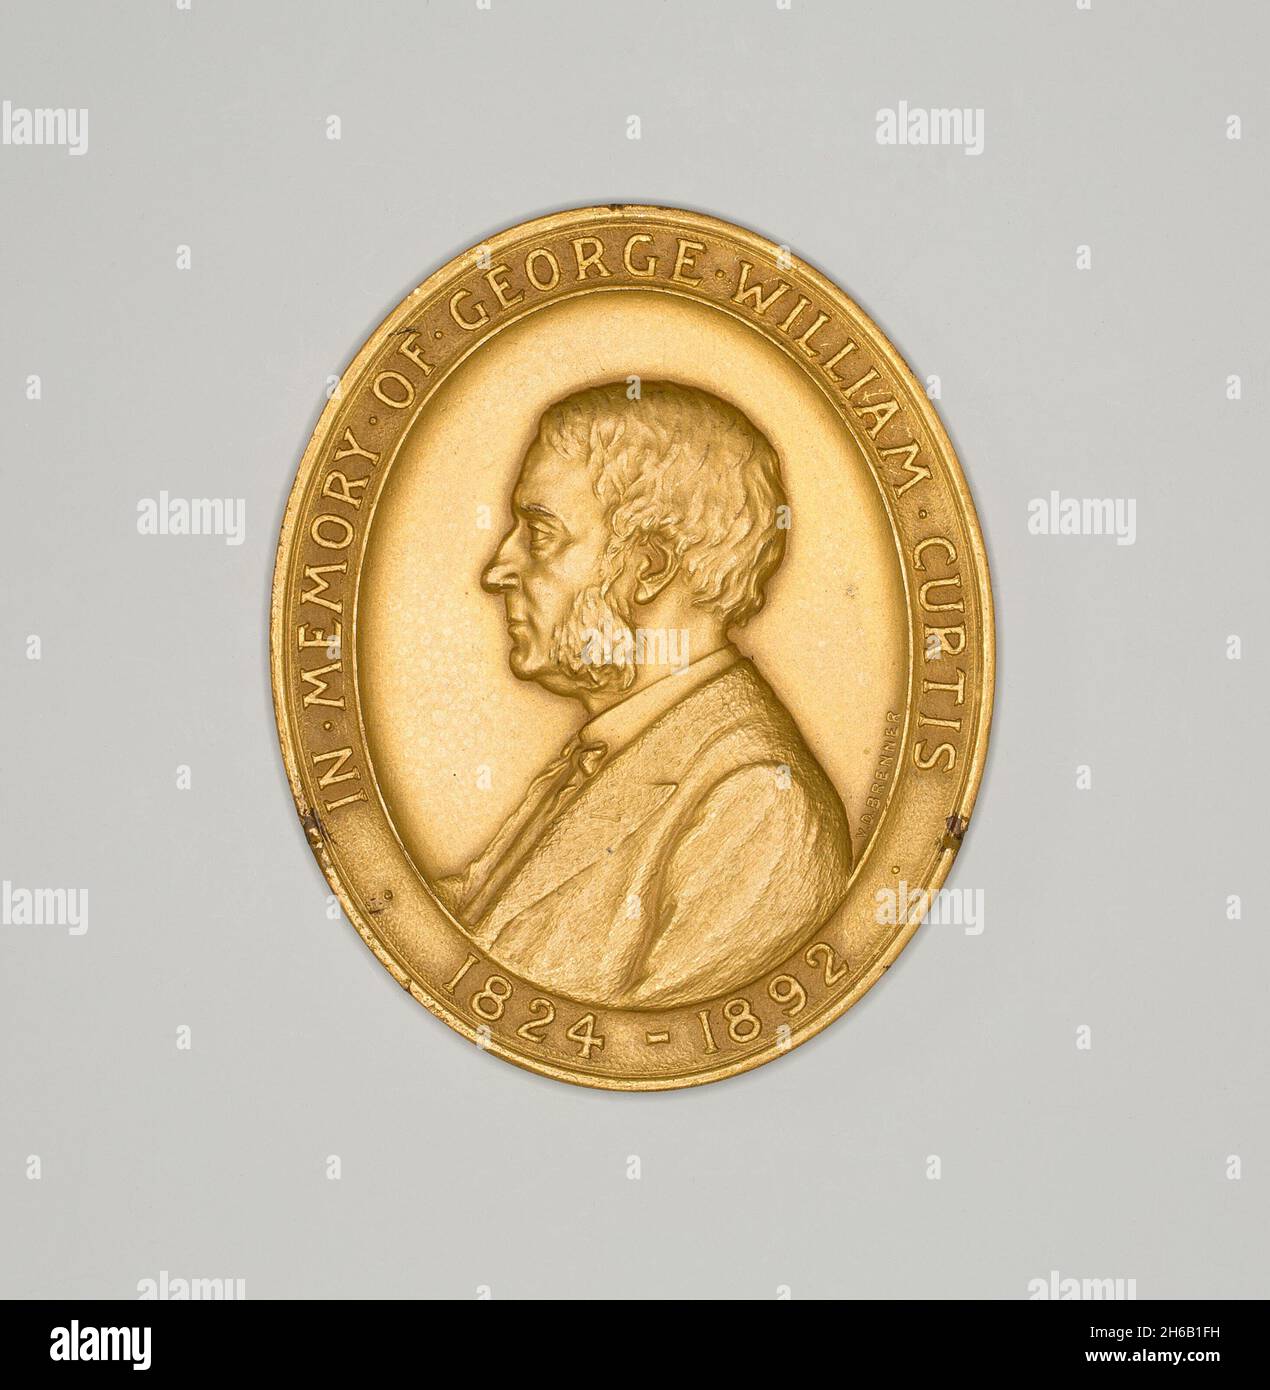 Medal Depicting George William Curtis, 1892/1908. Stock Photo